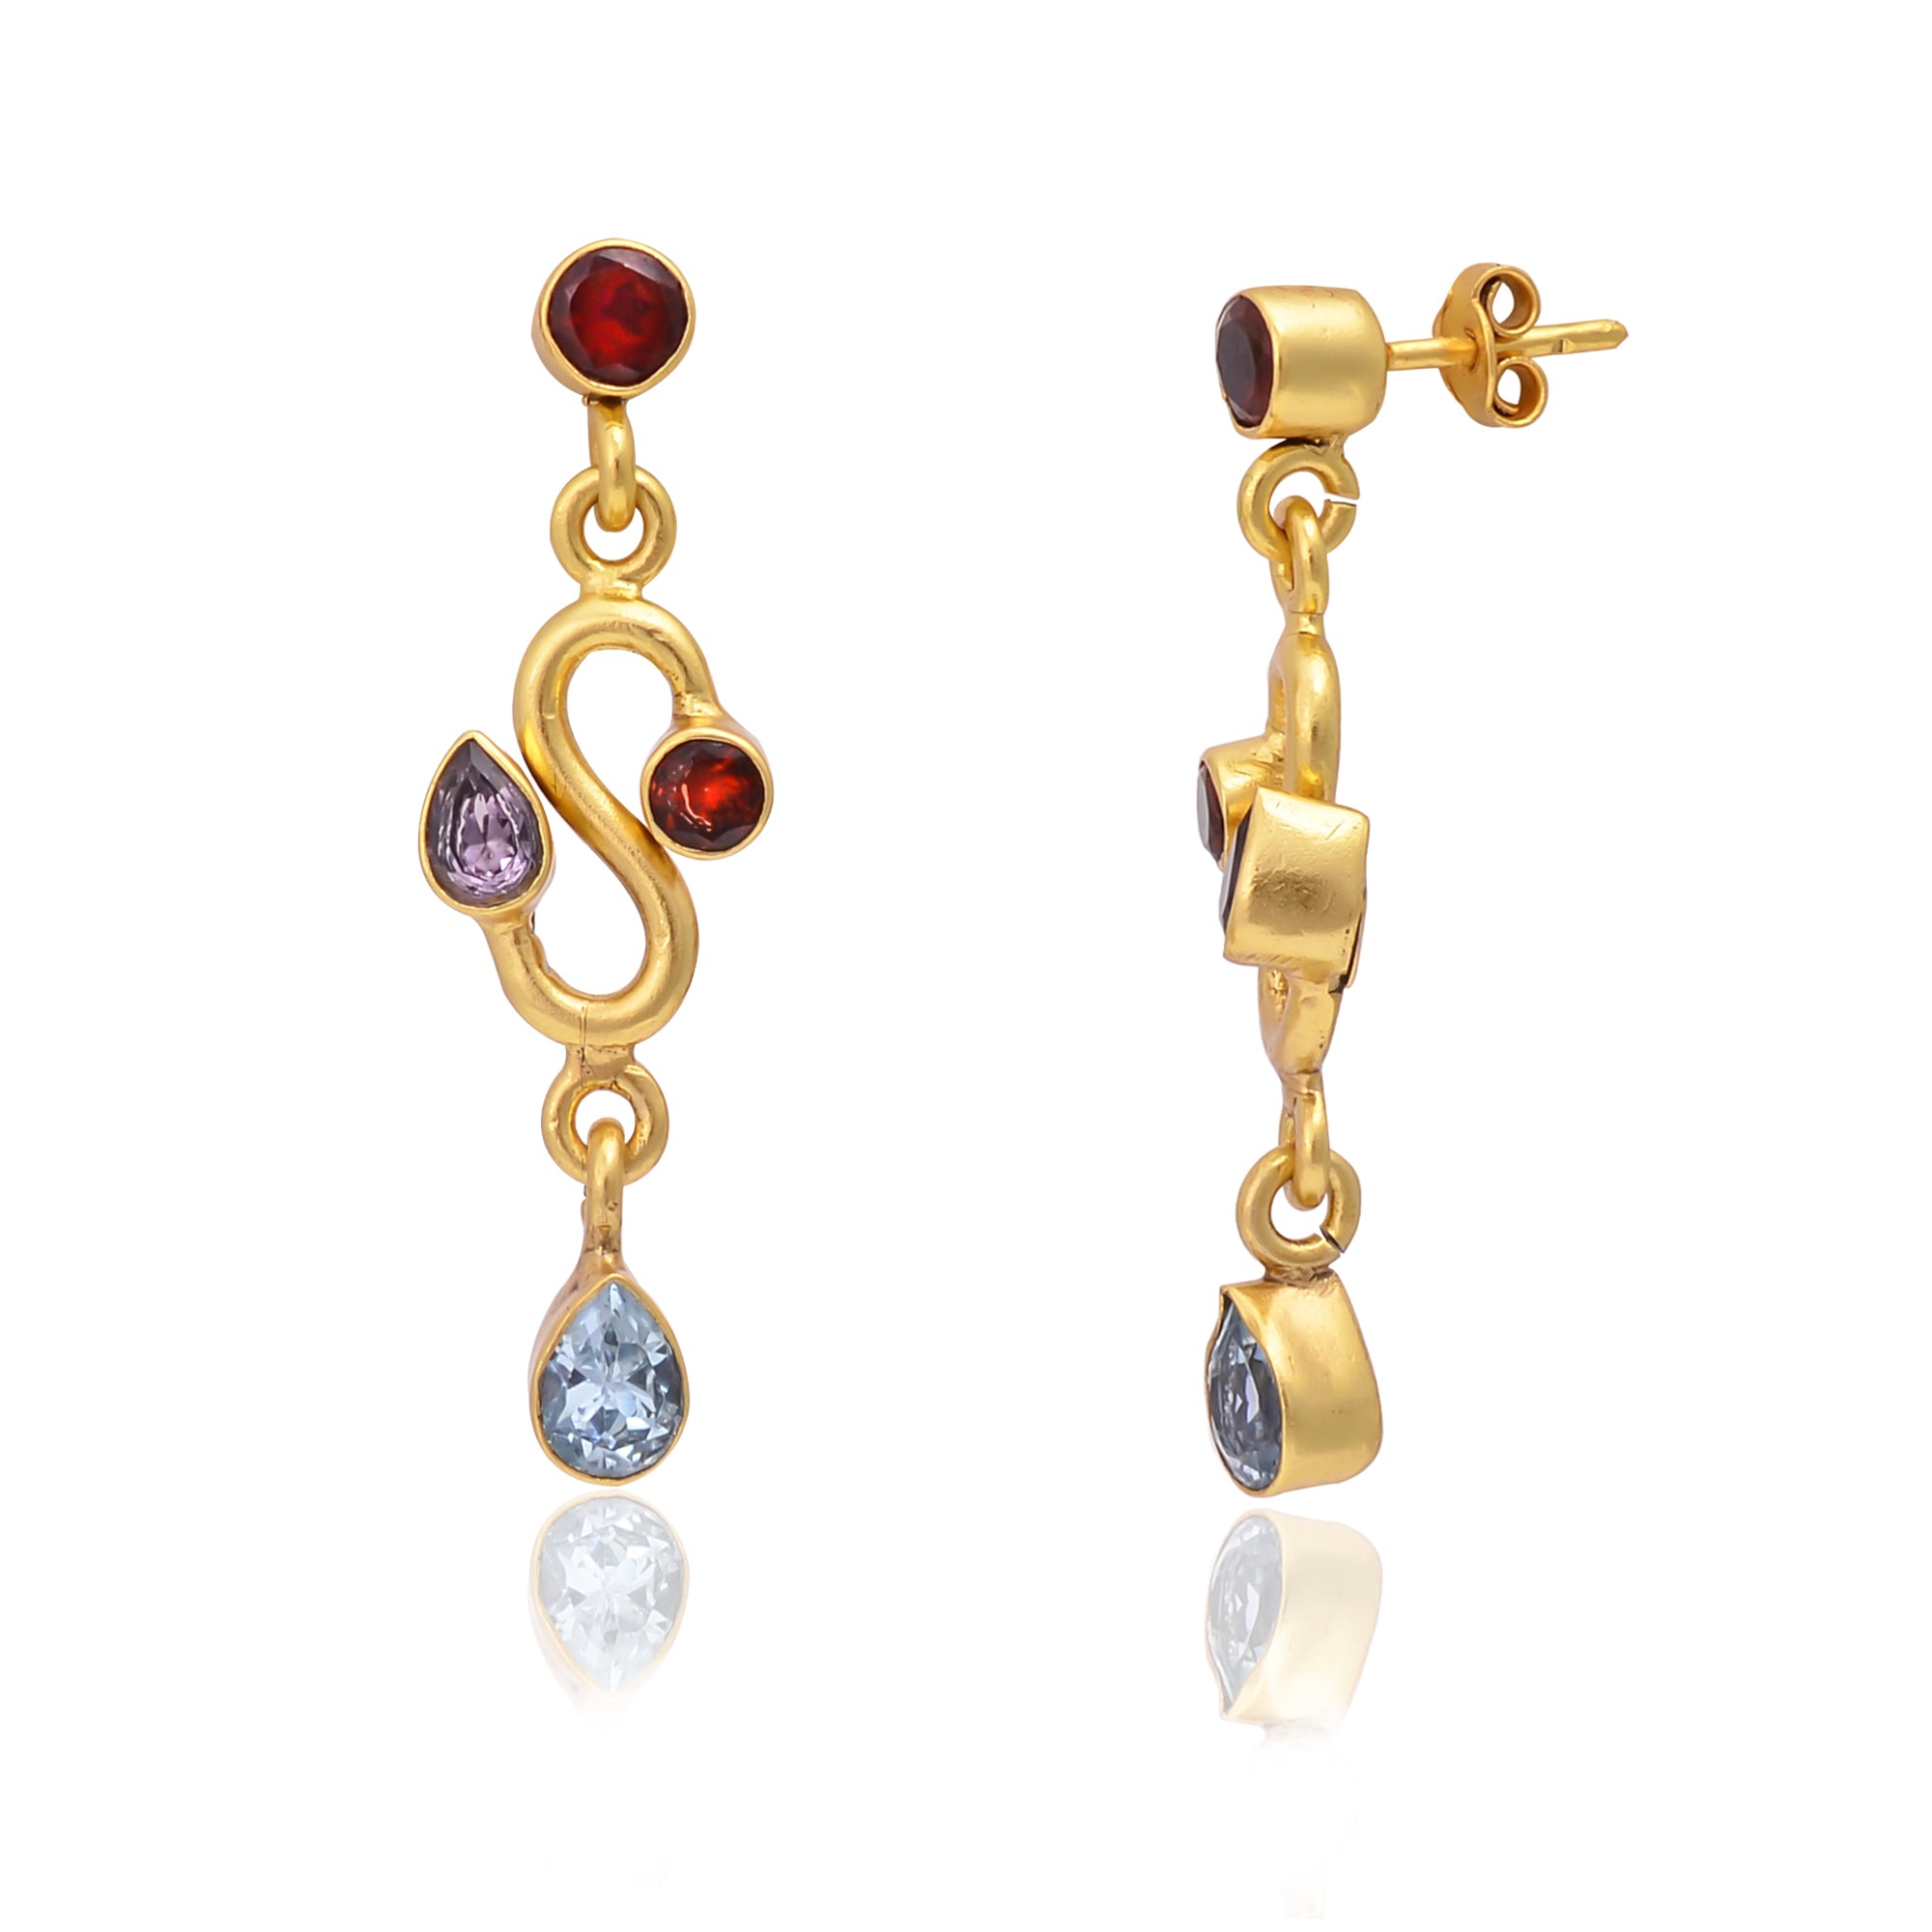 Silver Gold Plated Garnet, Blue Topaz, and Aphrodite Earring